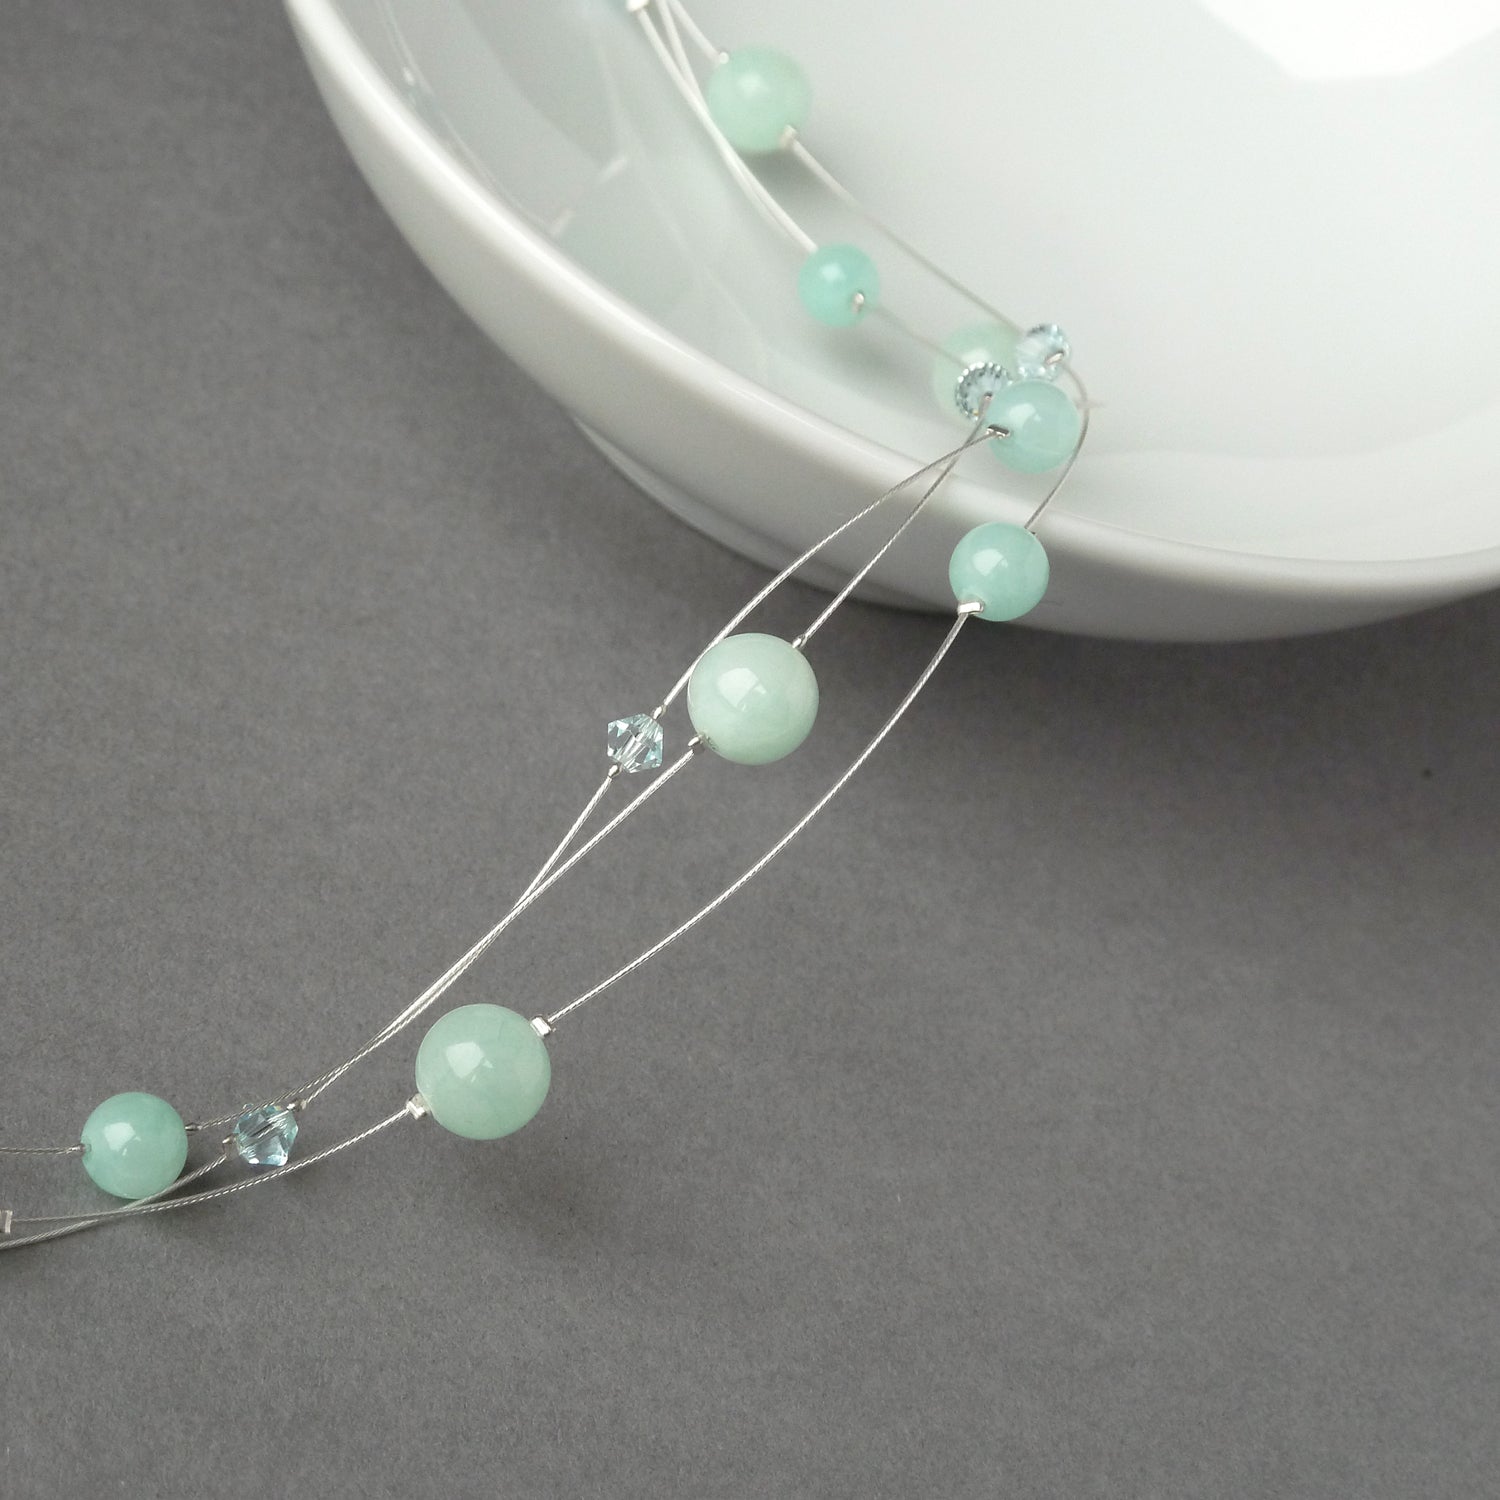 Mint three strand necklaces for weddings